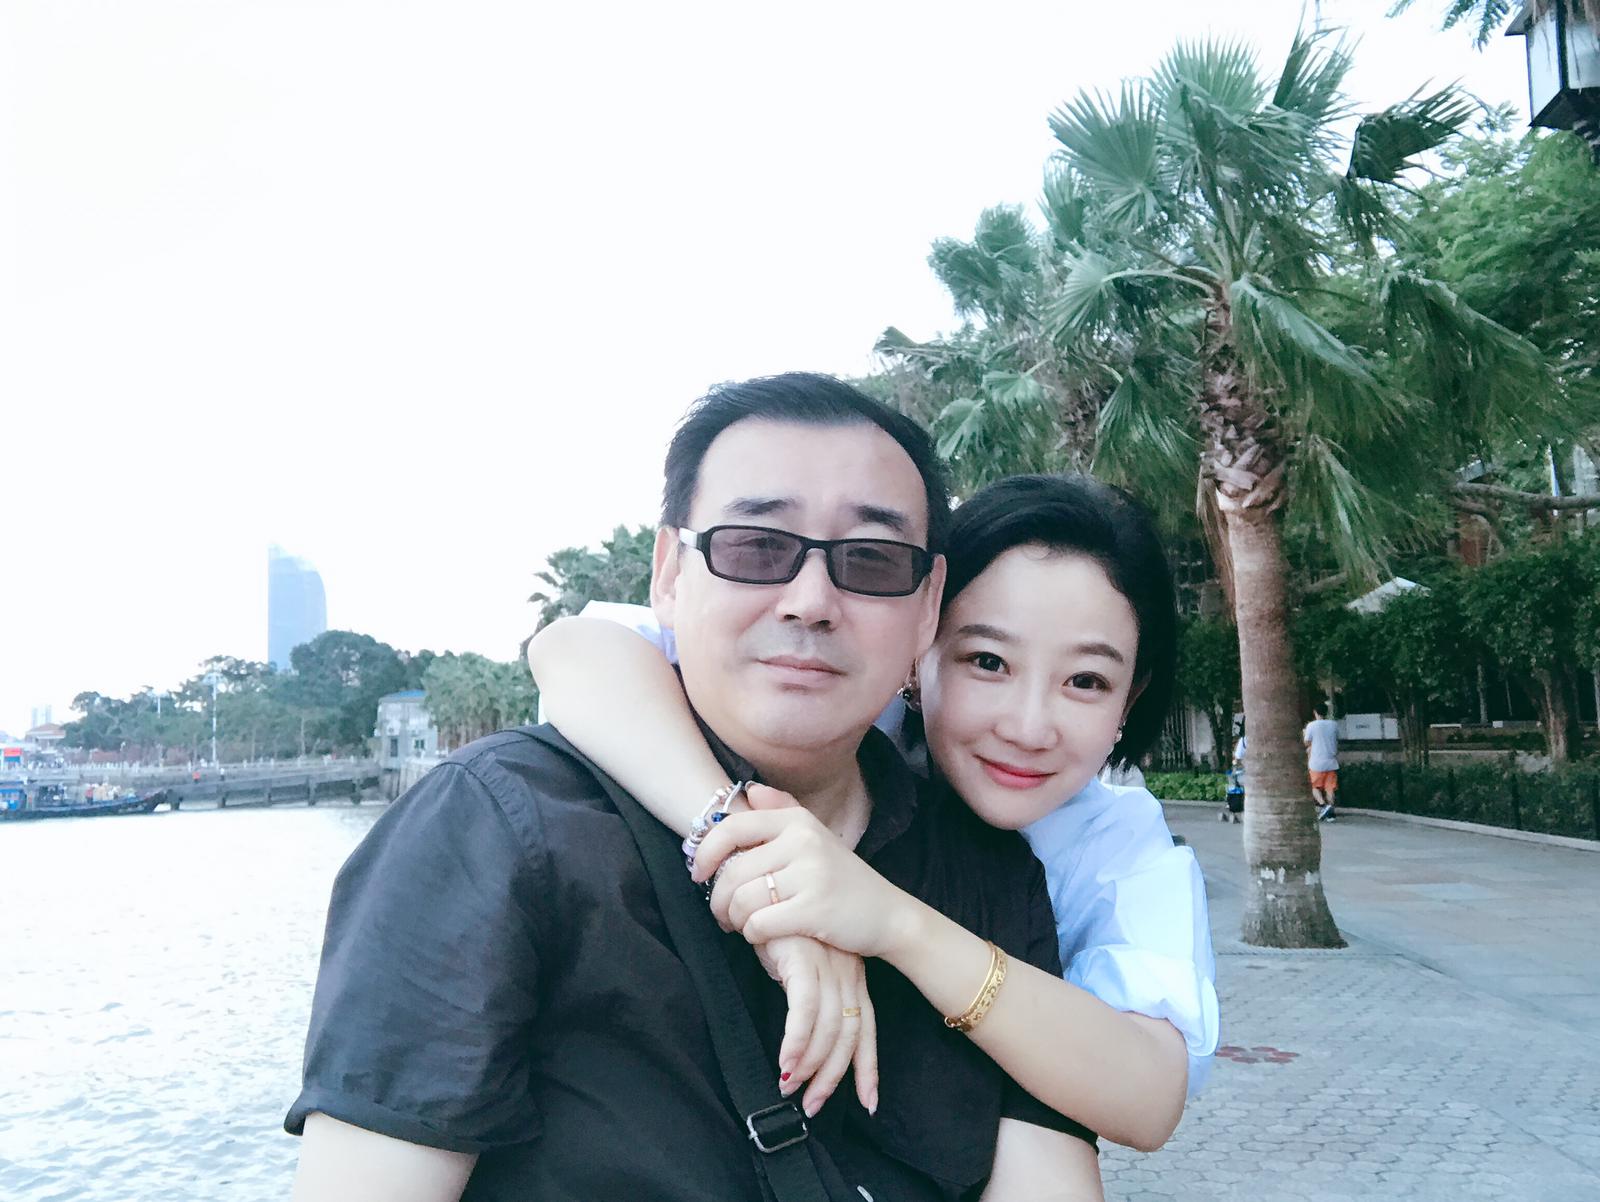 Mr Yang with his wife.